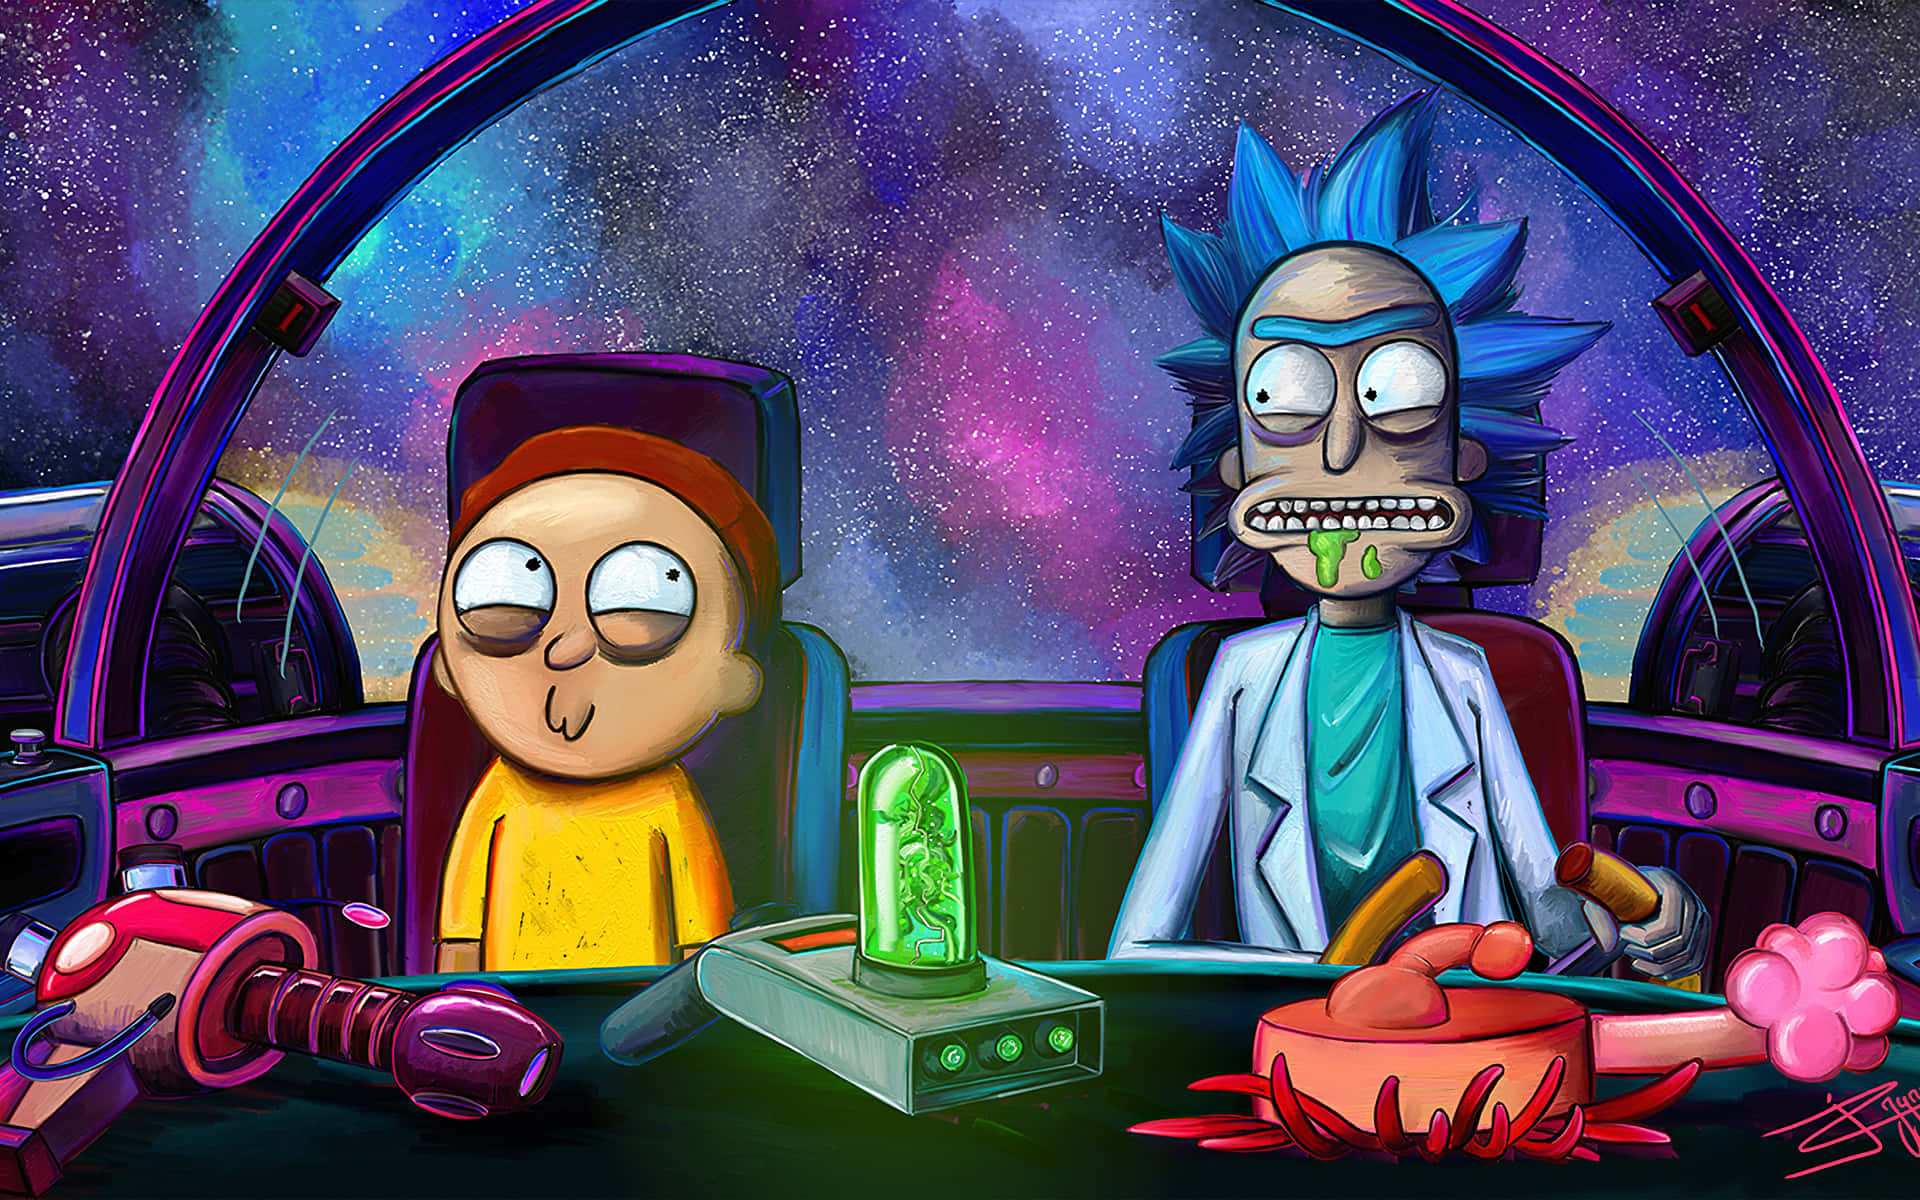 “Tune into Rick and Morty with this custom Macbook” Wallpaper